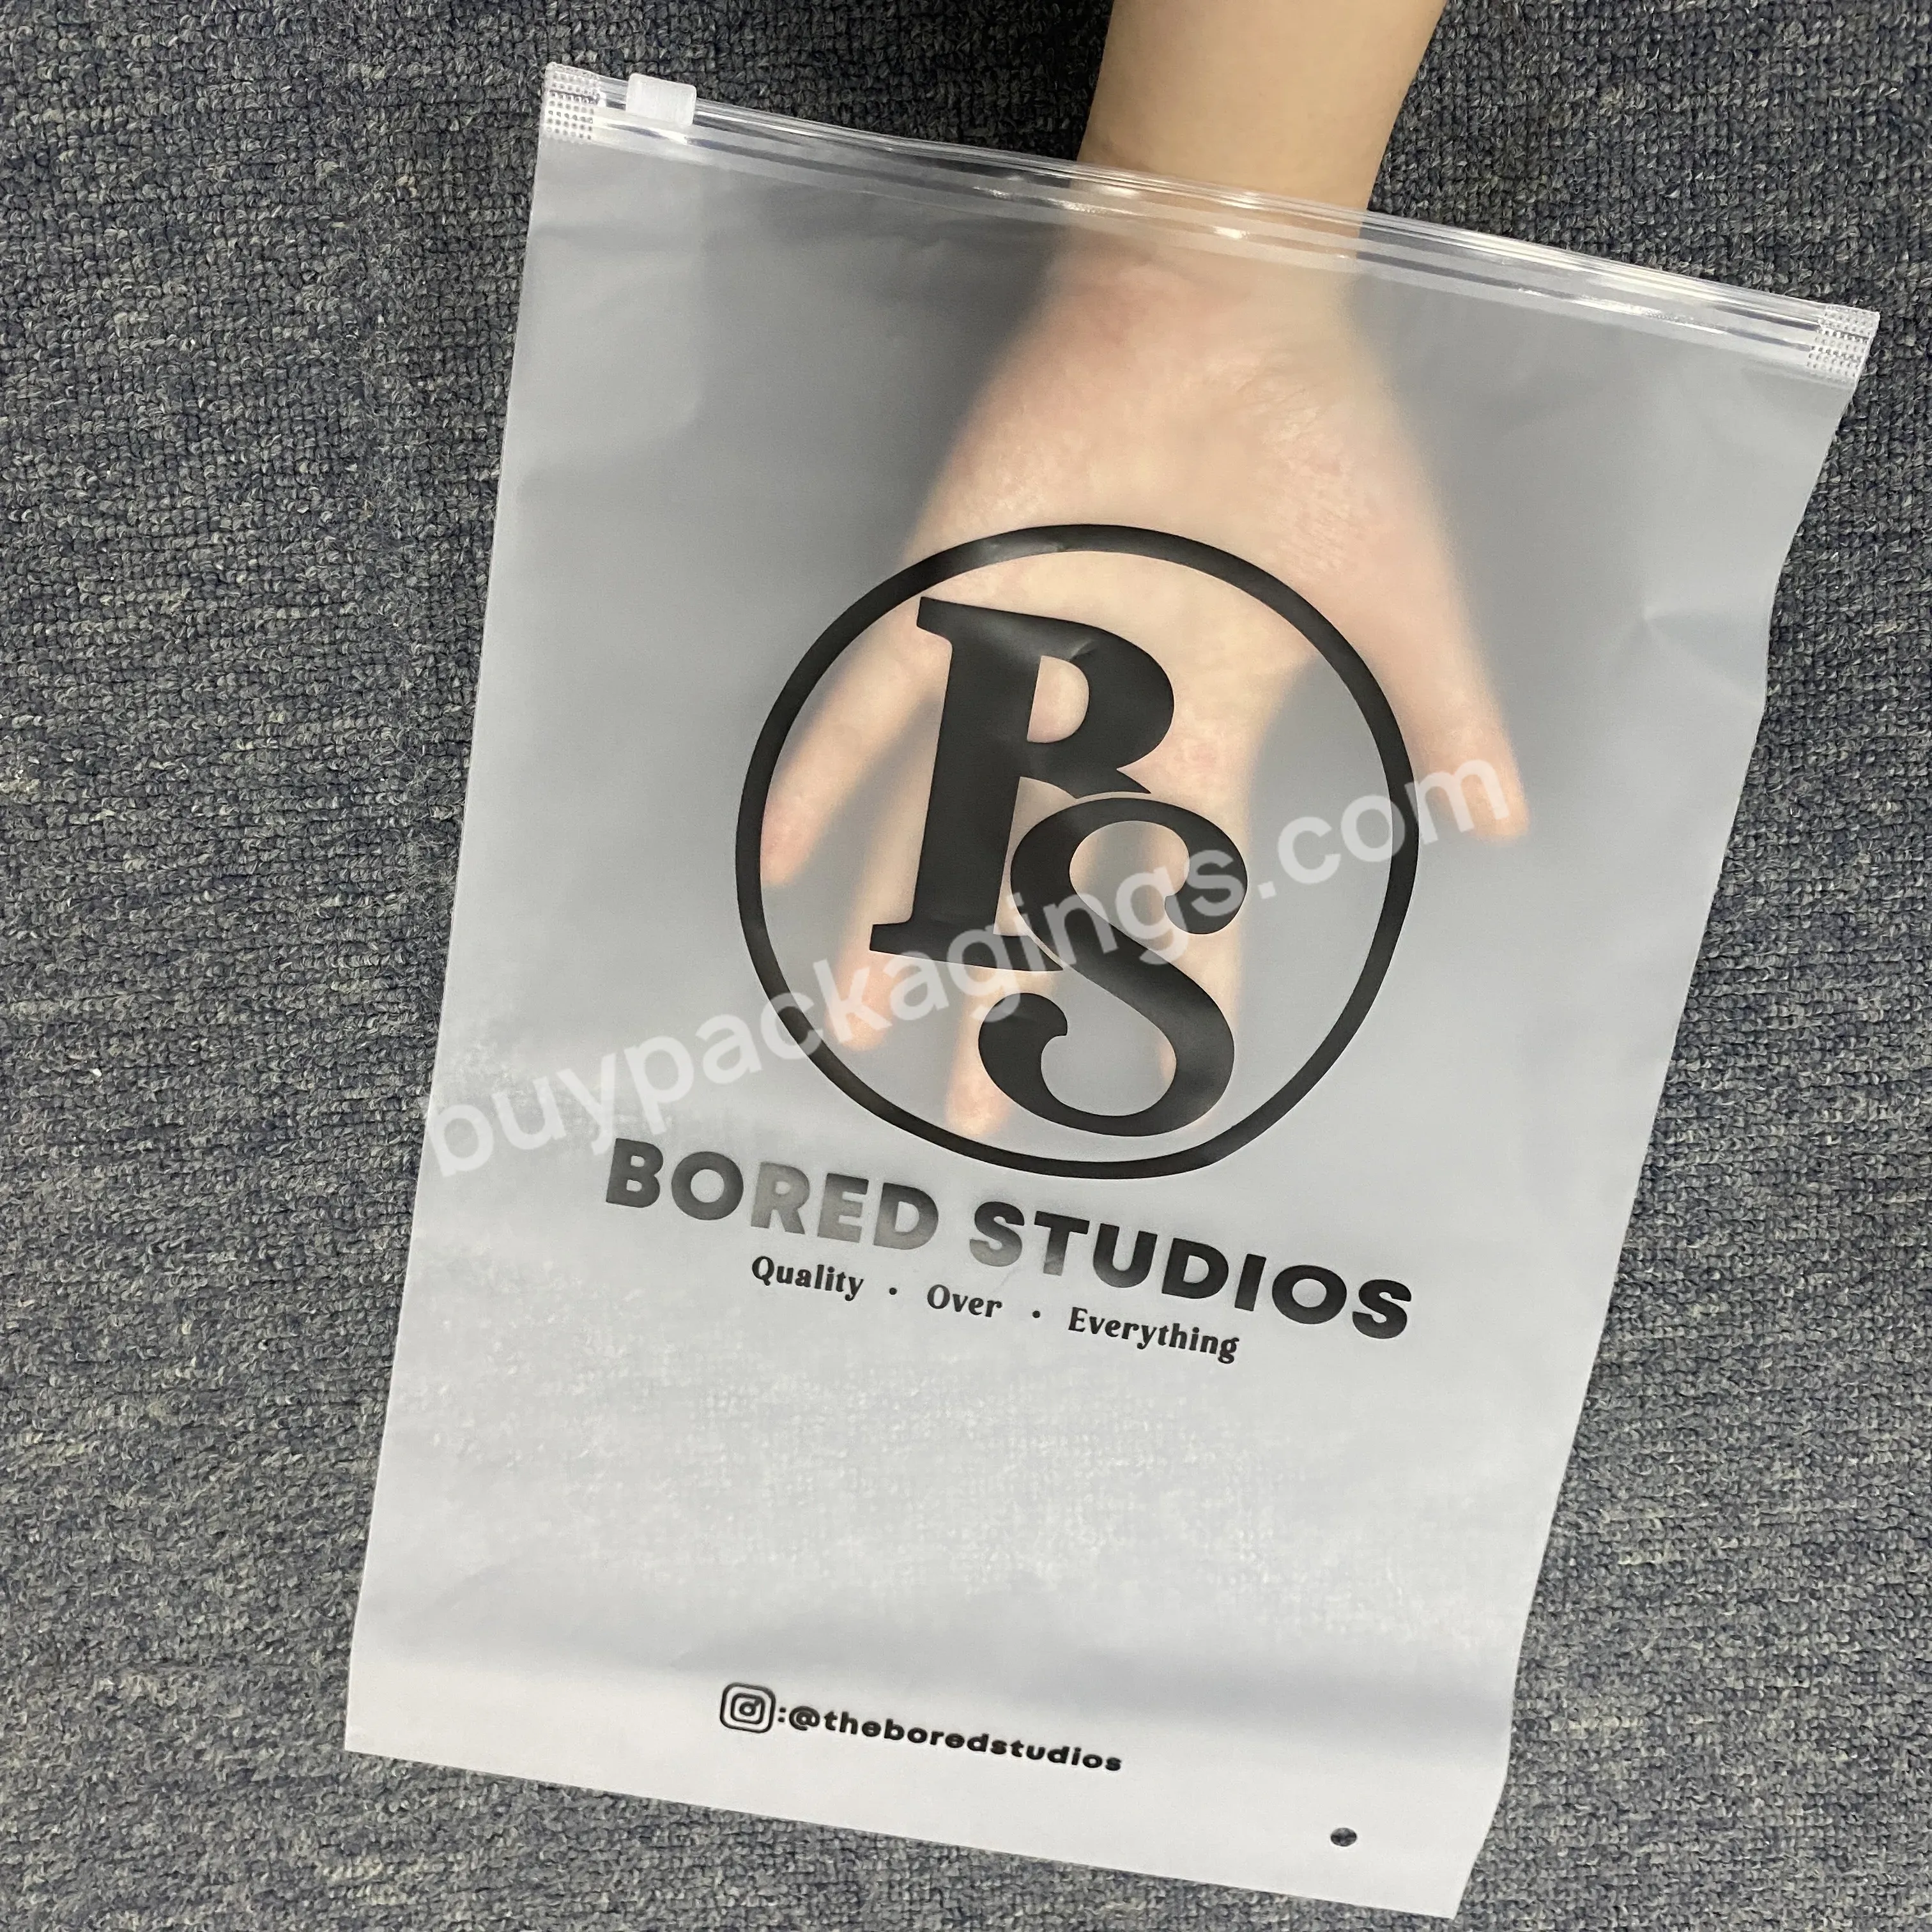 Recyclable Frosted Zipper Bags Customized Designs And Sizes Available For Cosmetics Socks T-shirts Shoes - Buy Custom Size Logo Print,Colorful Brand Frosted Zipper Bag,Plastic Packaging For Travel.